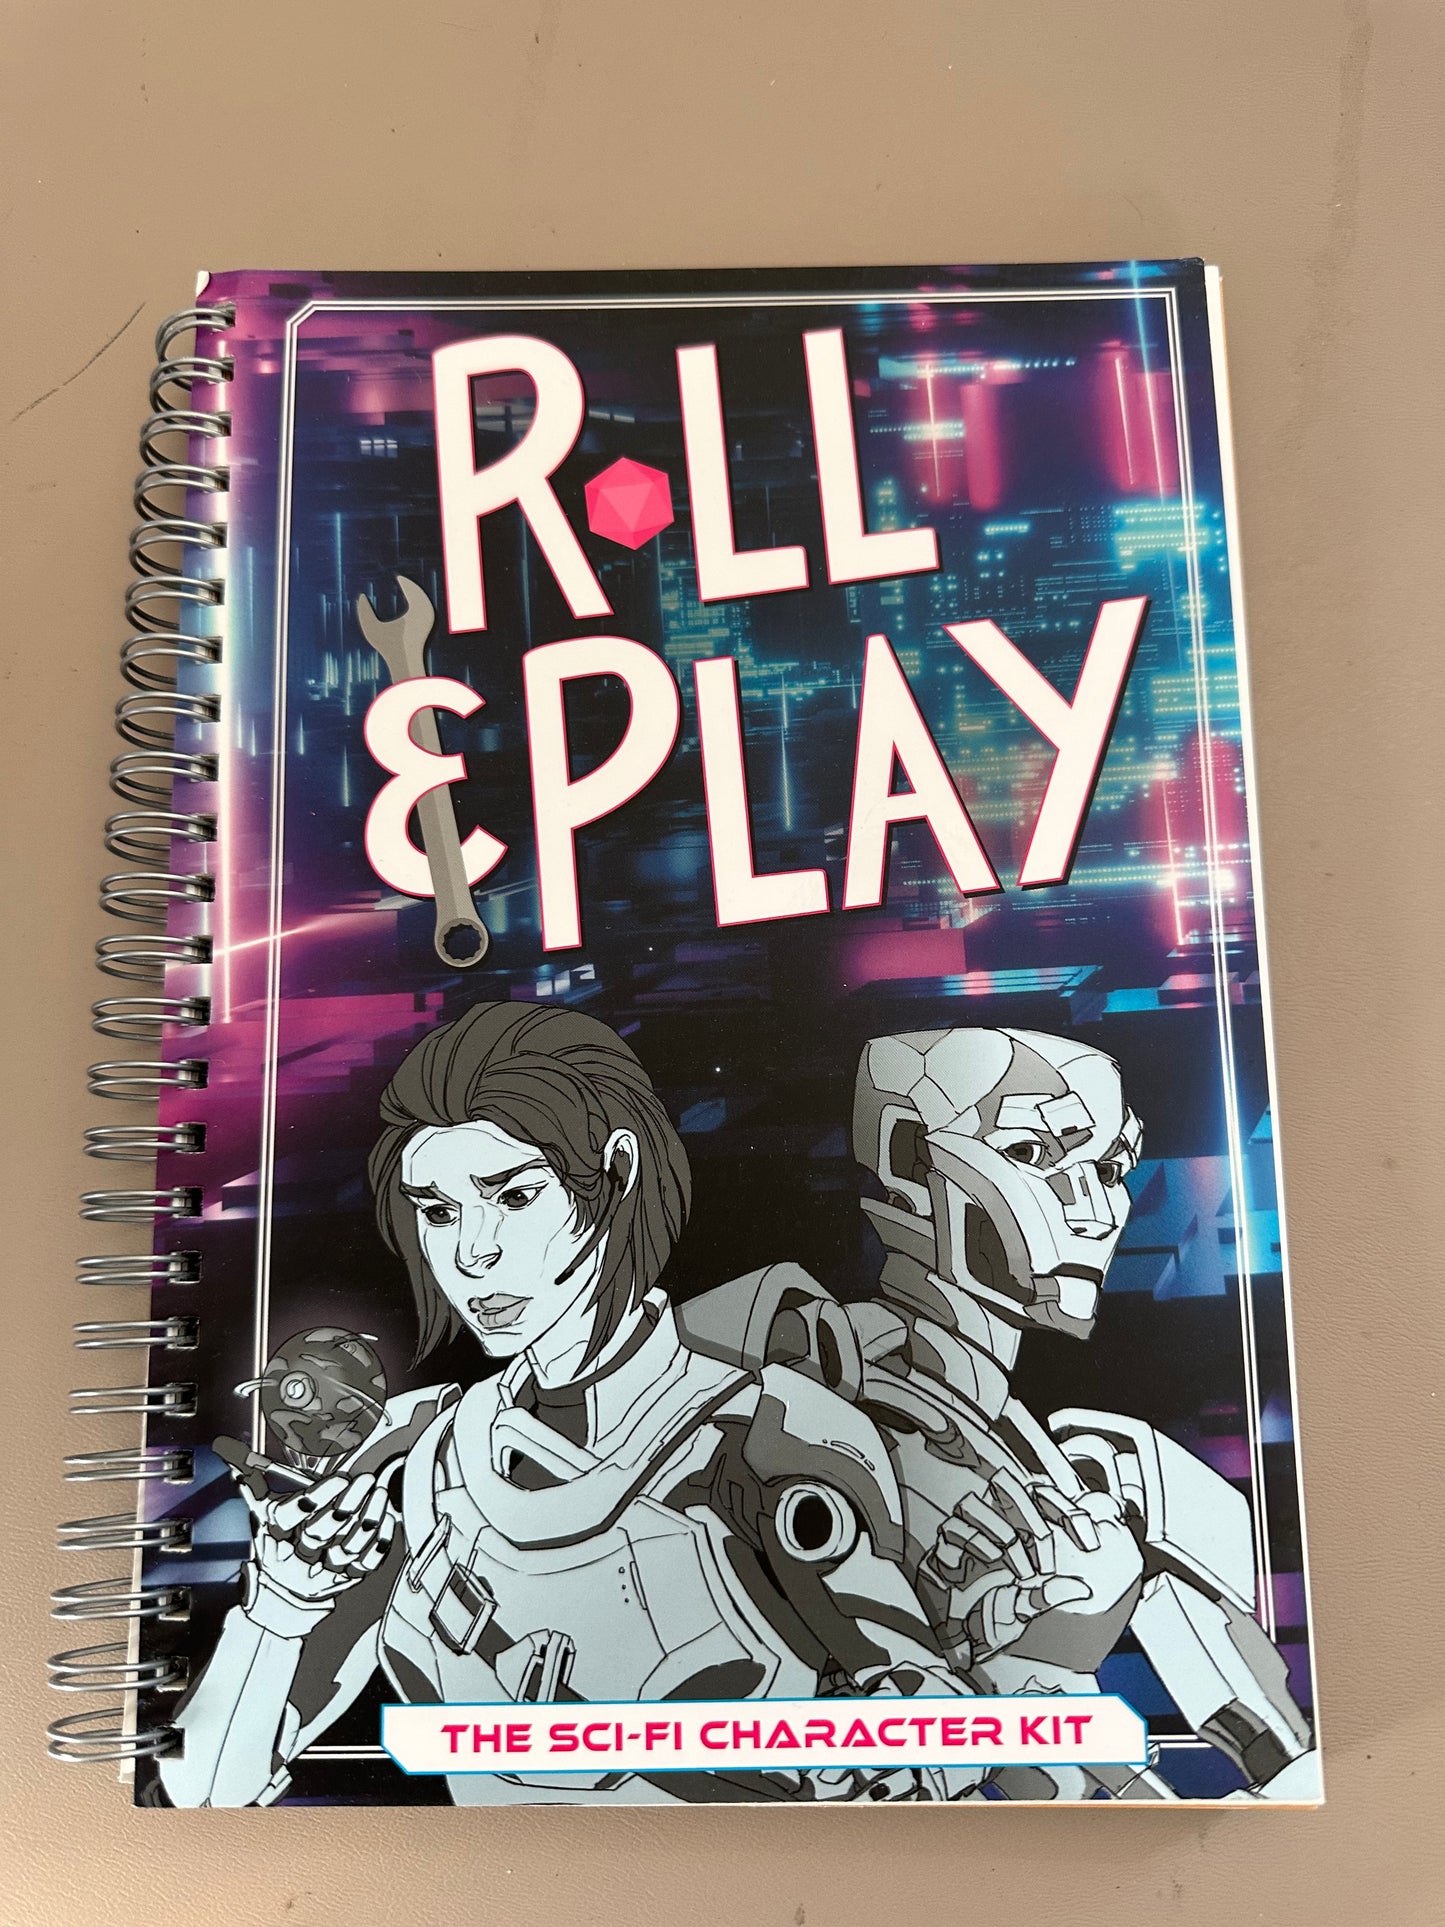 The Sci Fi Character Kit by Roll and Play Press